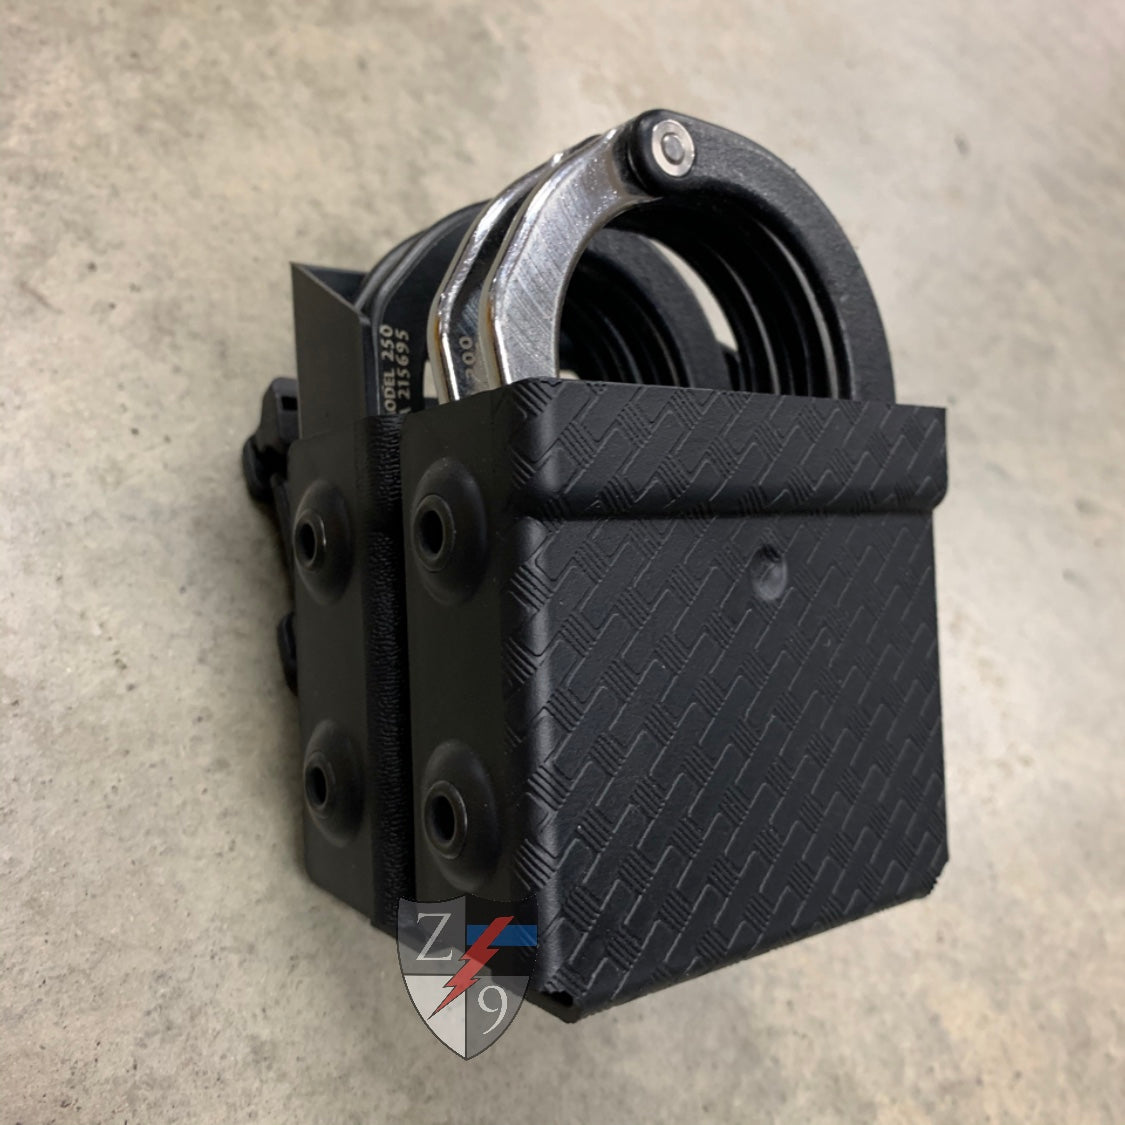 ES® System Cuff Case-ES® Innovation HandCuff Case-Versitle, low profile,  rugged,retention and presentation like no other